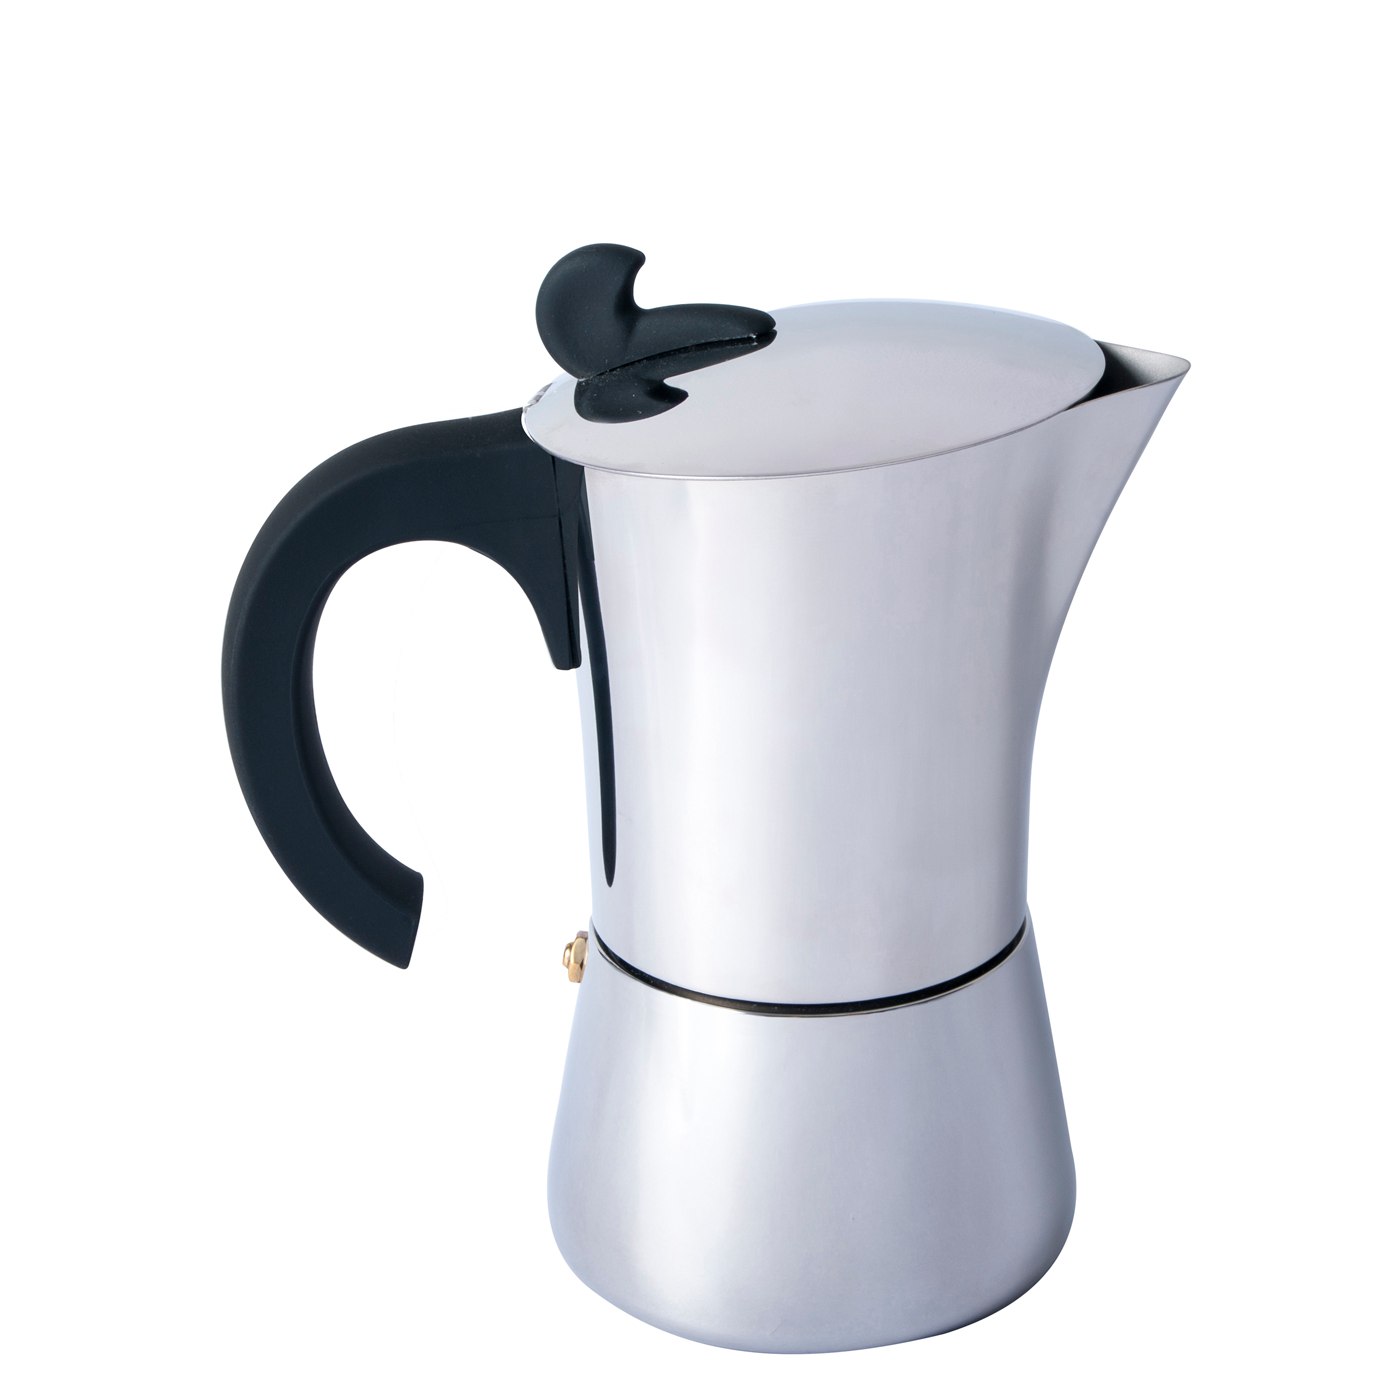 Picture of basic NATURE | Relags Espresso maker for 4 cups - stainless steel